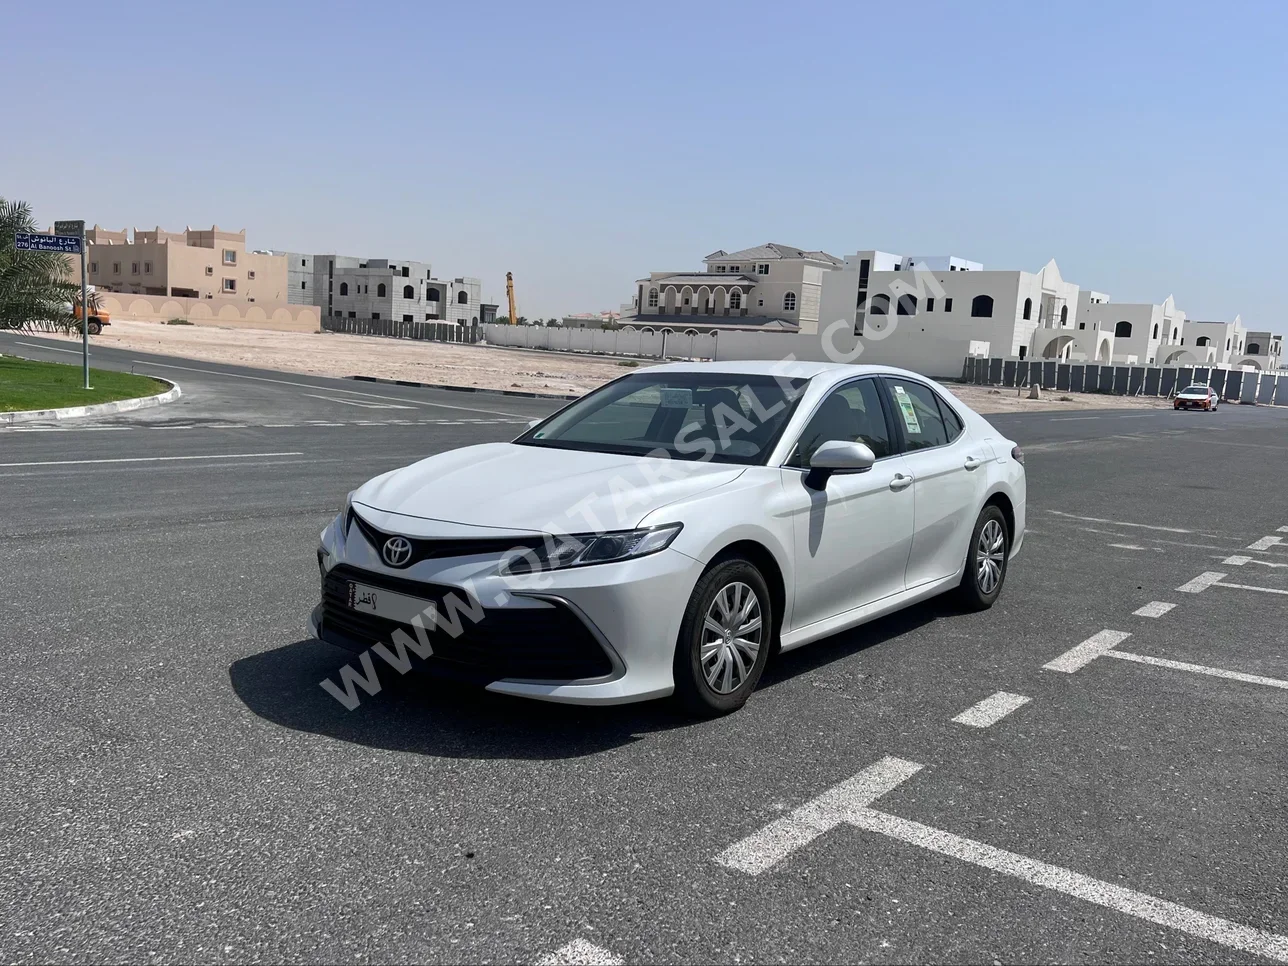  Toyota  Camry  LE  2022  Automatic  17,000 Km  4 Cylinder  Front Wheel Drive (FWD)  Sedan  White  With Warranty